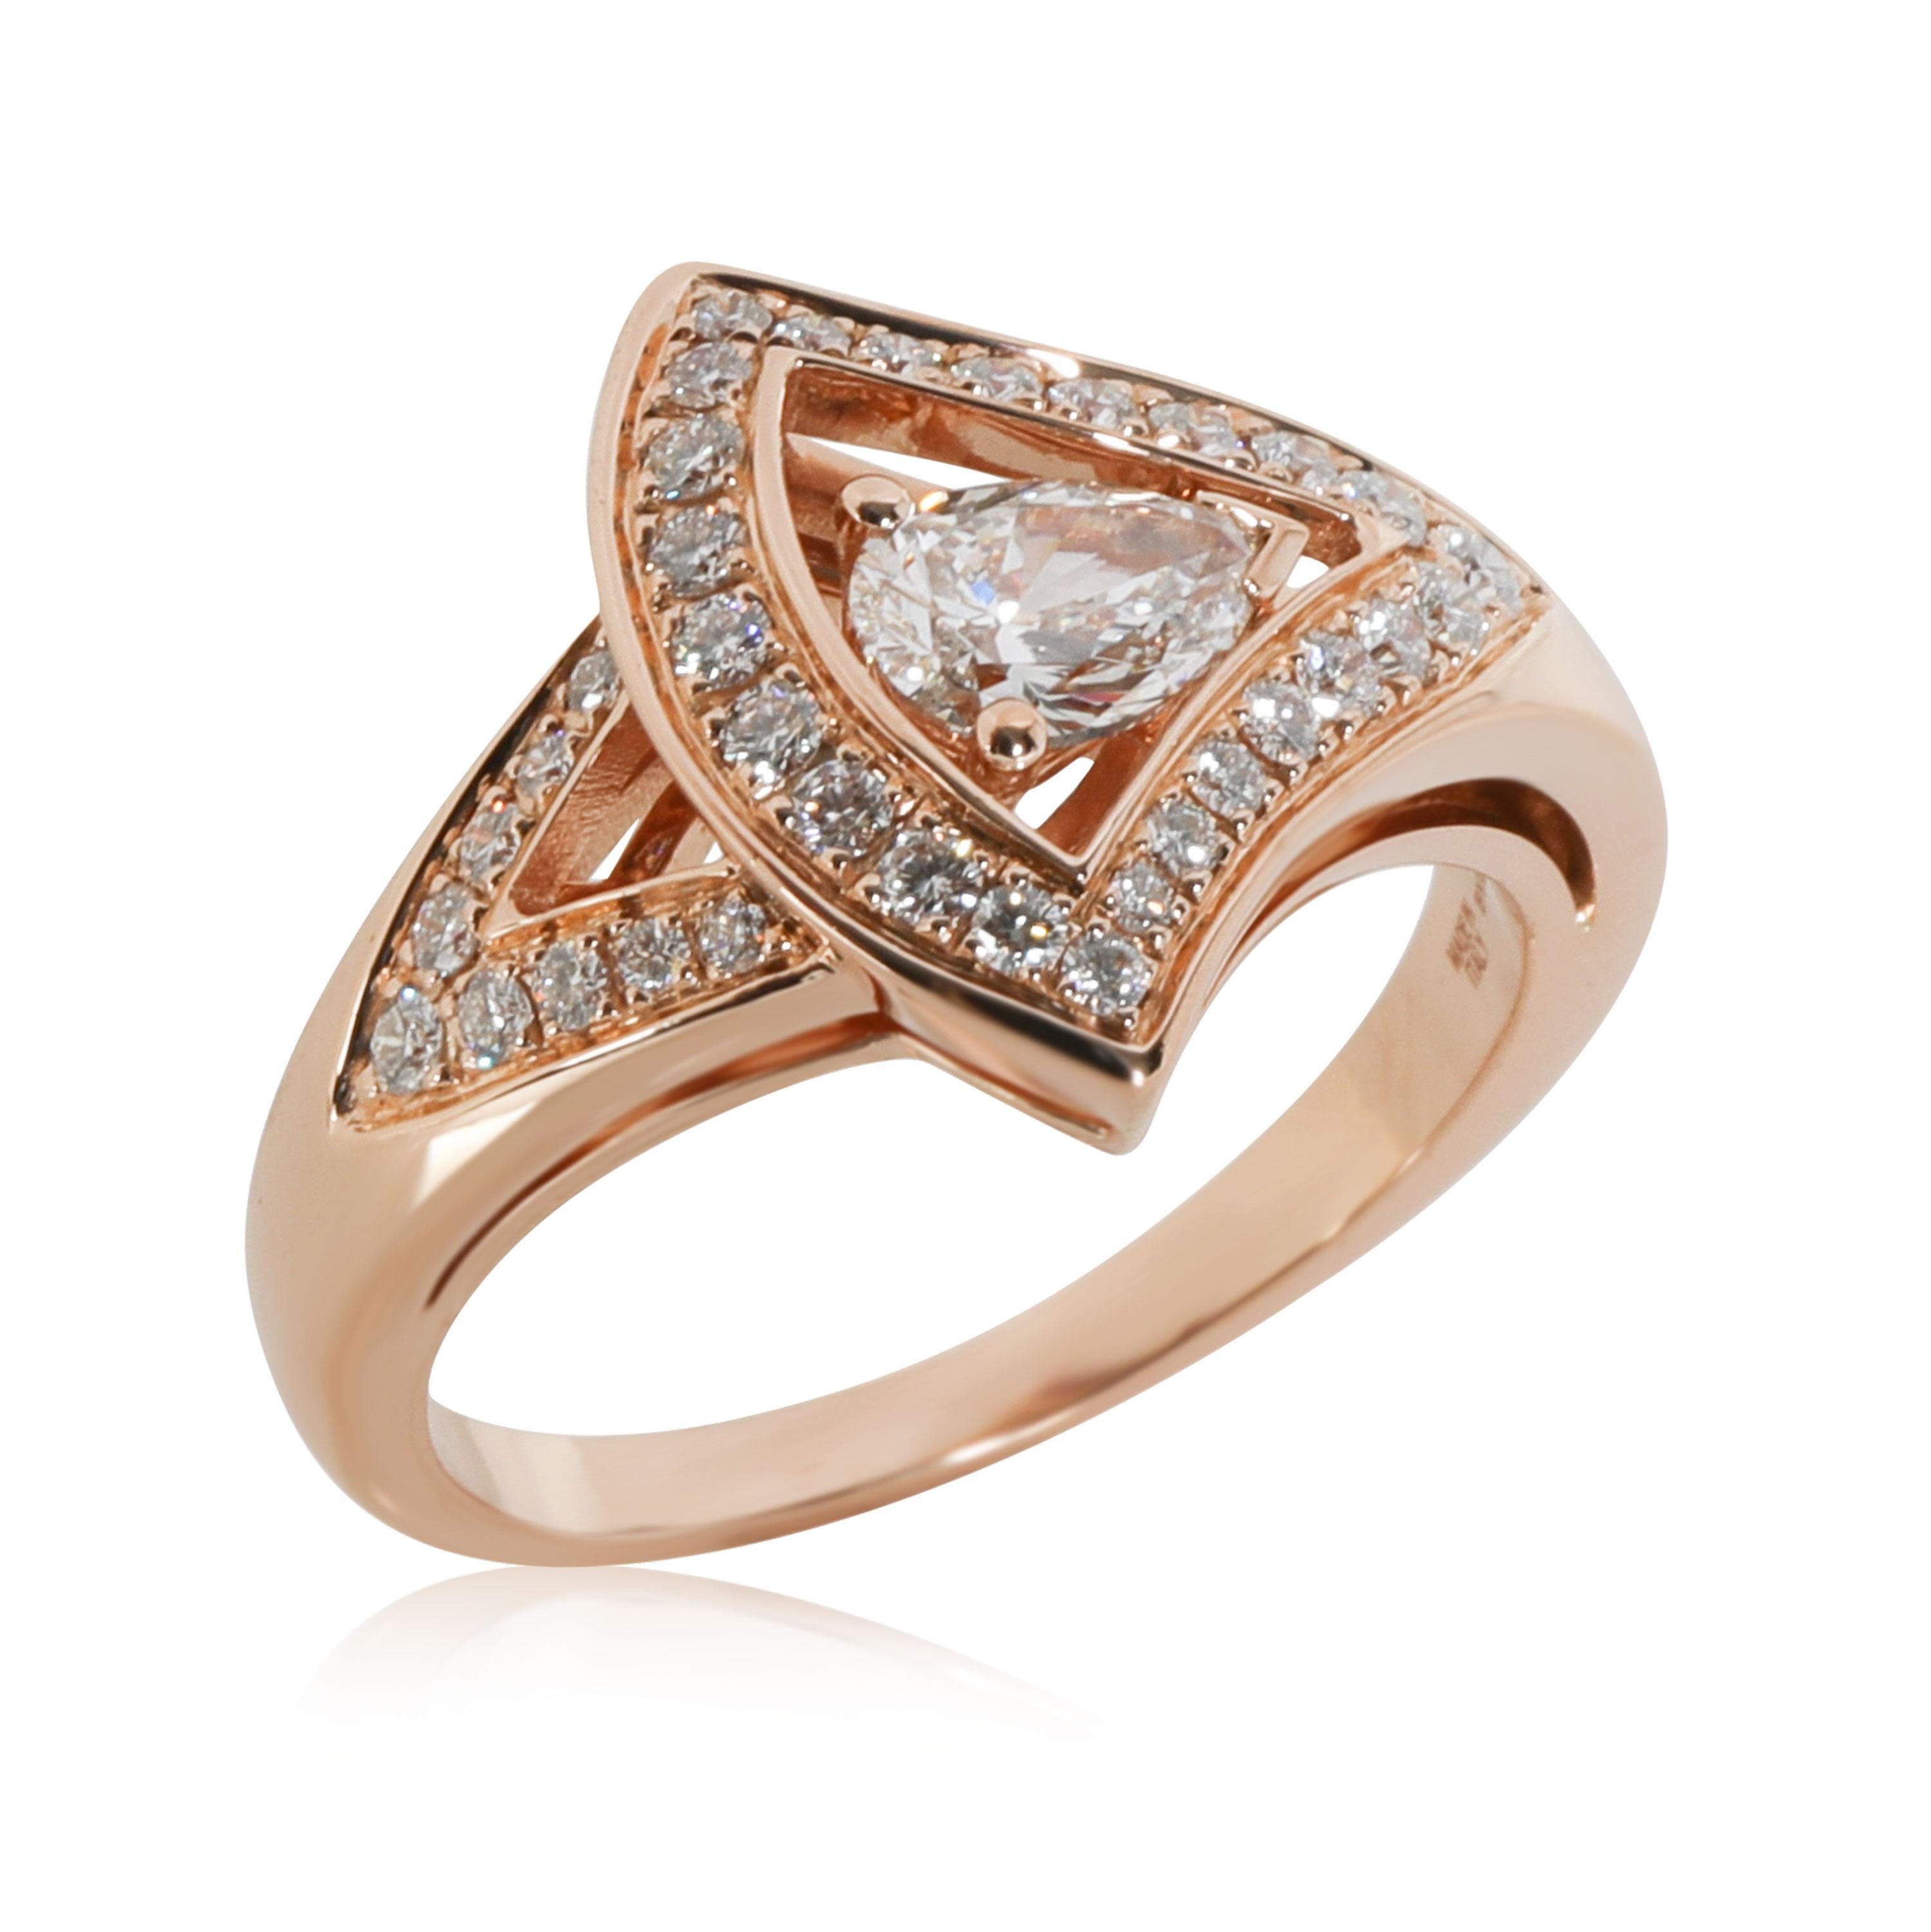 Bulgari Diva's Dream Diamond Ring in 18k Rose Gold 0.67 CTW

PRIMARY DETAILS
SKU: 116423
Listing Title: Bulgari Diva's Dream Diamond Ring in 18k Rose Gold 0.67 CTW
Condition Description: Retails for 9700 USD. In excellent condition and recently